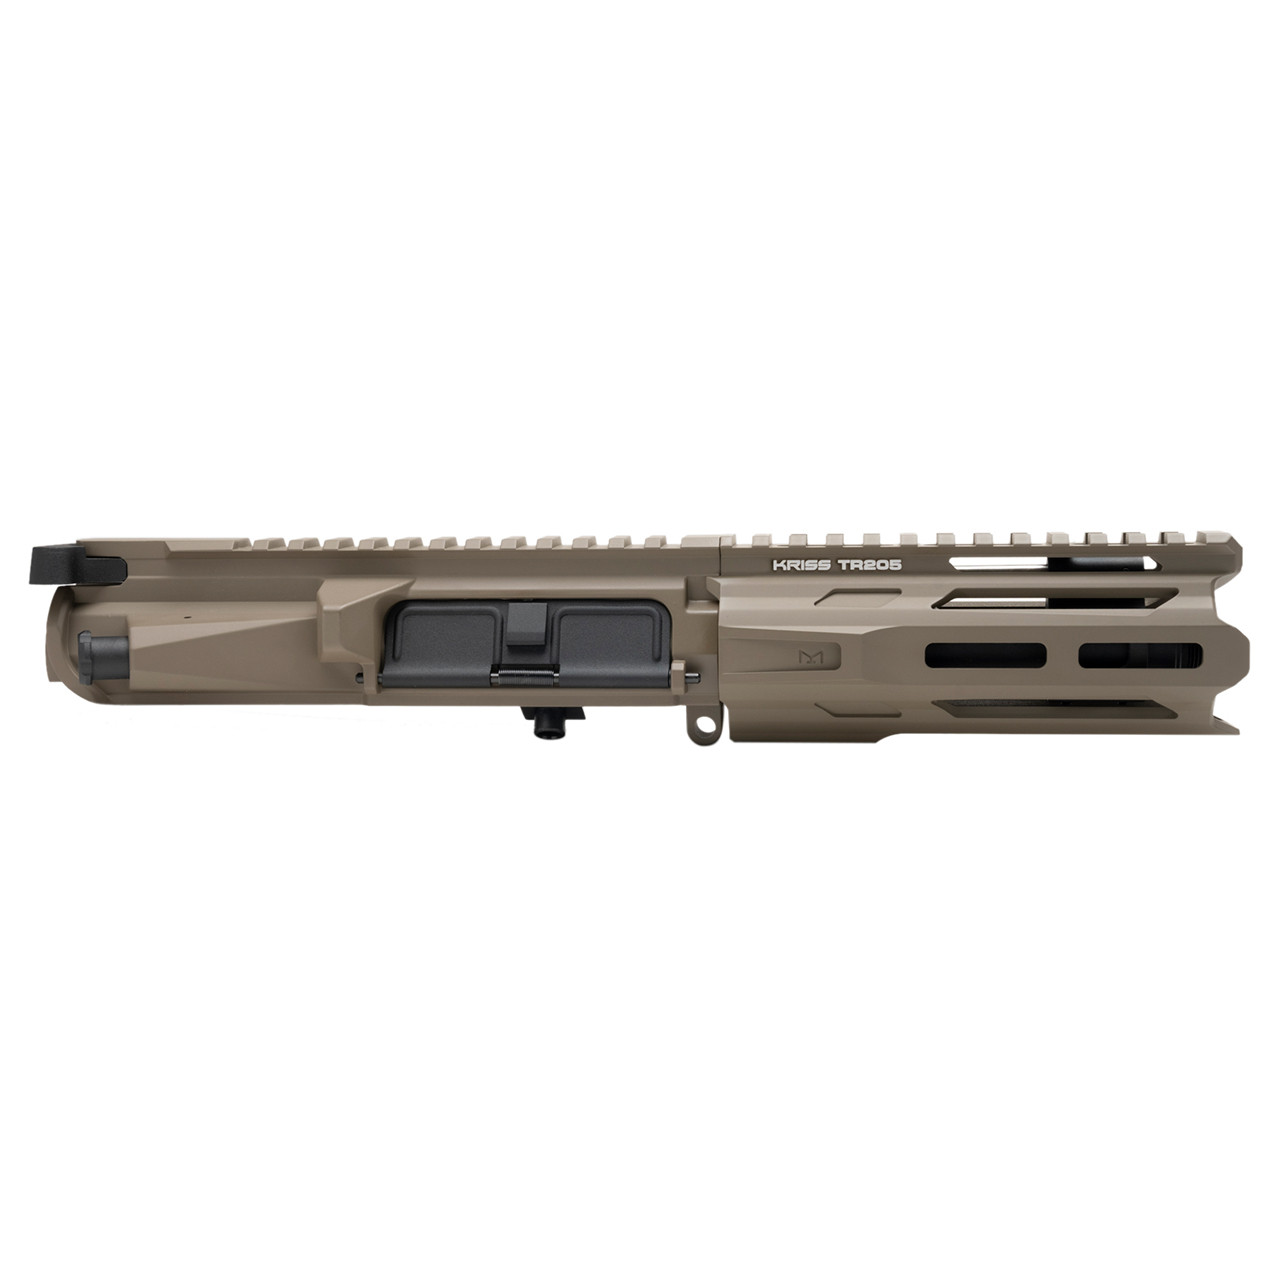 Shop Trident MK2 PDW-M Complete Upper Assembly / FDE - $ 235 - Krytac.com | For Airsoft Use Only.